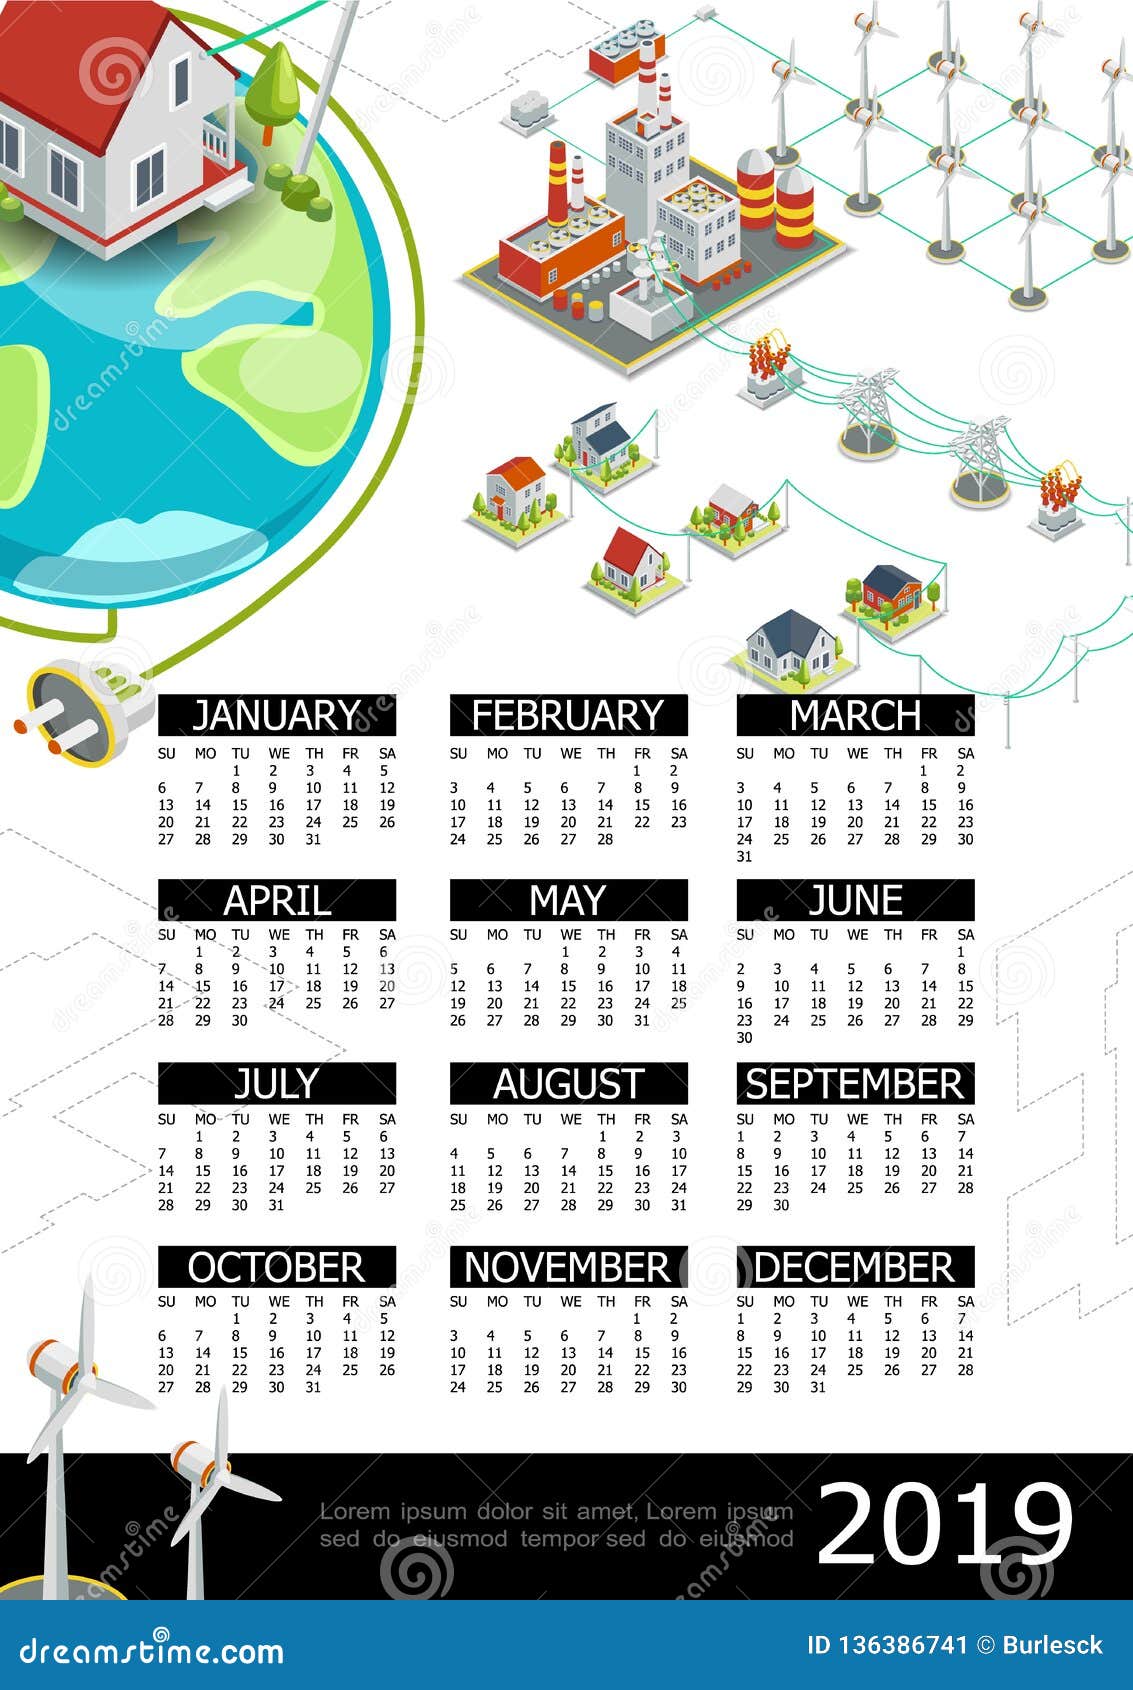 Isometric Electricity 2019 Year Calendar Template Stock Vector Illustration Of Electricity Isometric 136386741